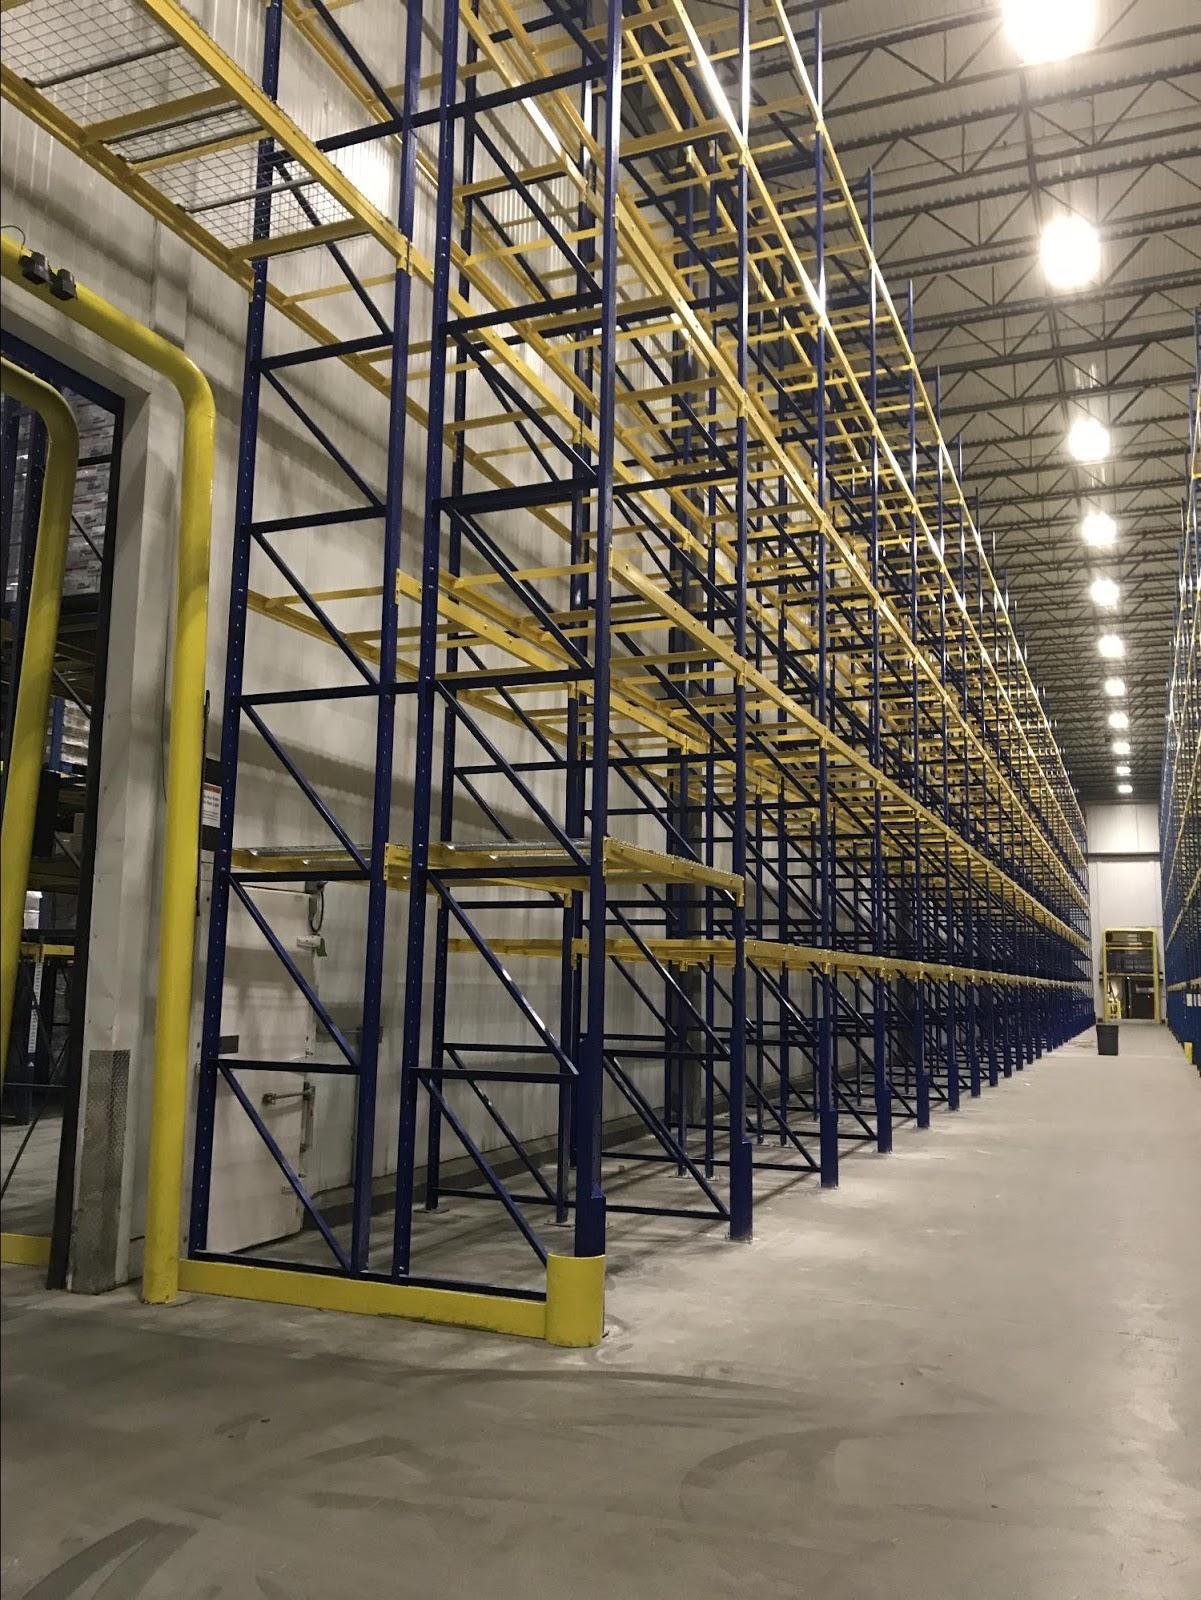 Structural Pallet Racking Installed by Industrial Equipment Erectors